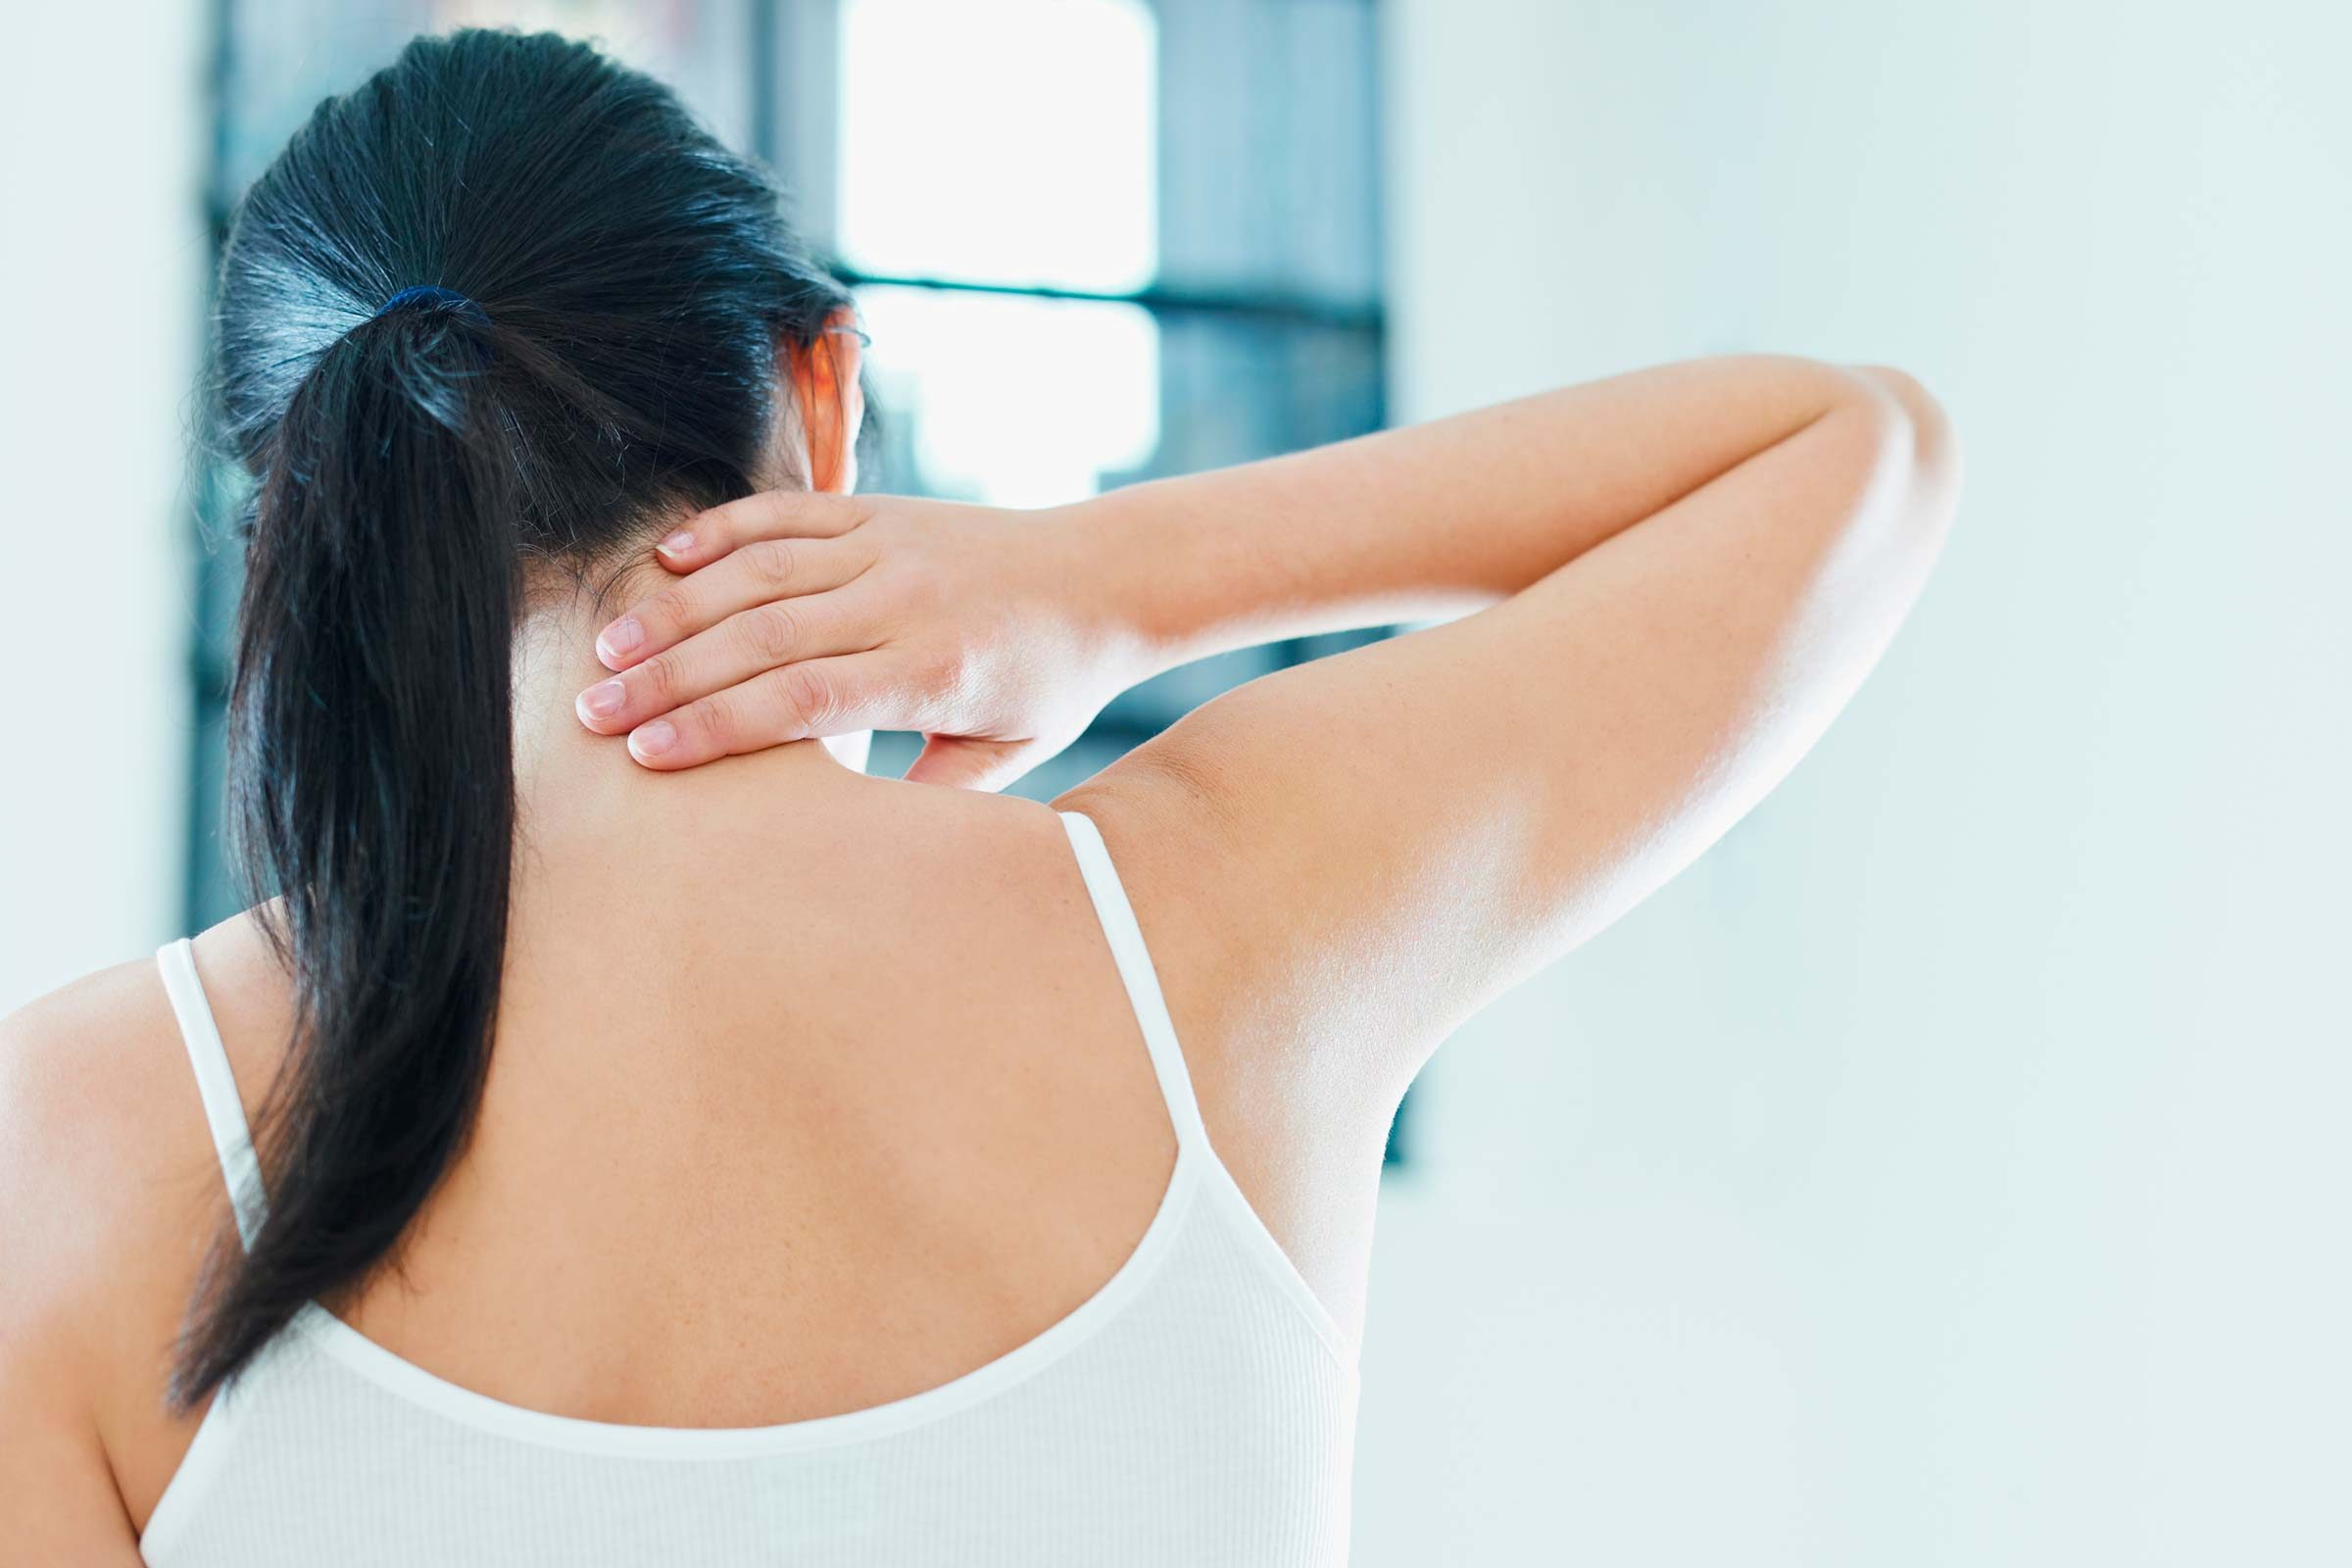 Woke Up With a Stiff Neck? Here’s What to Do Next